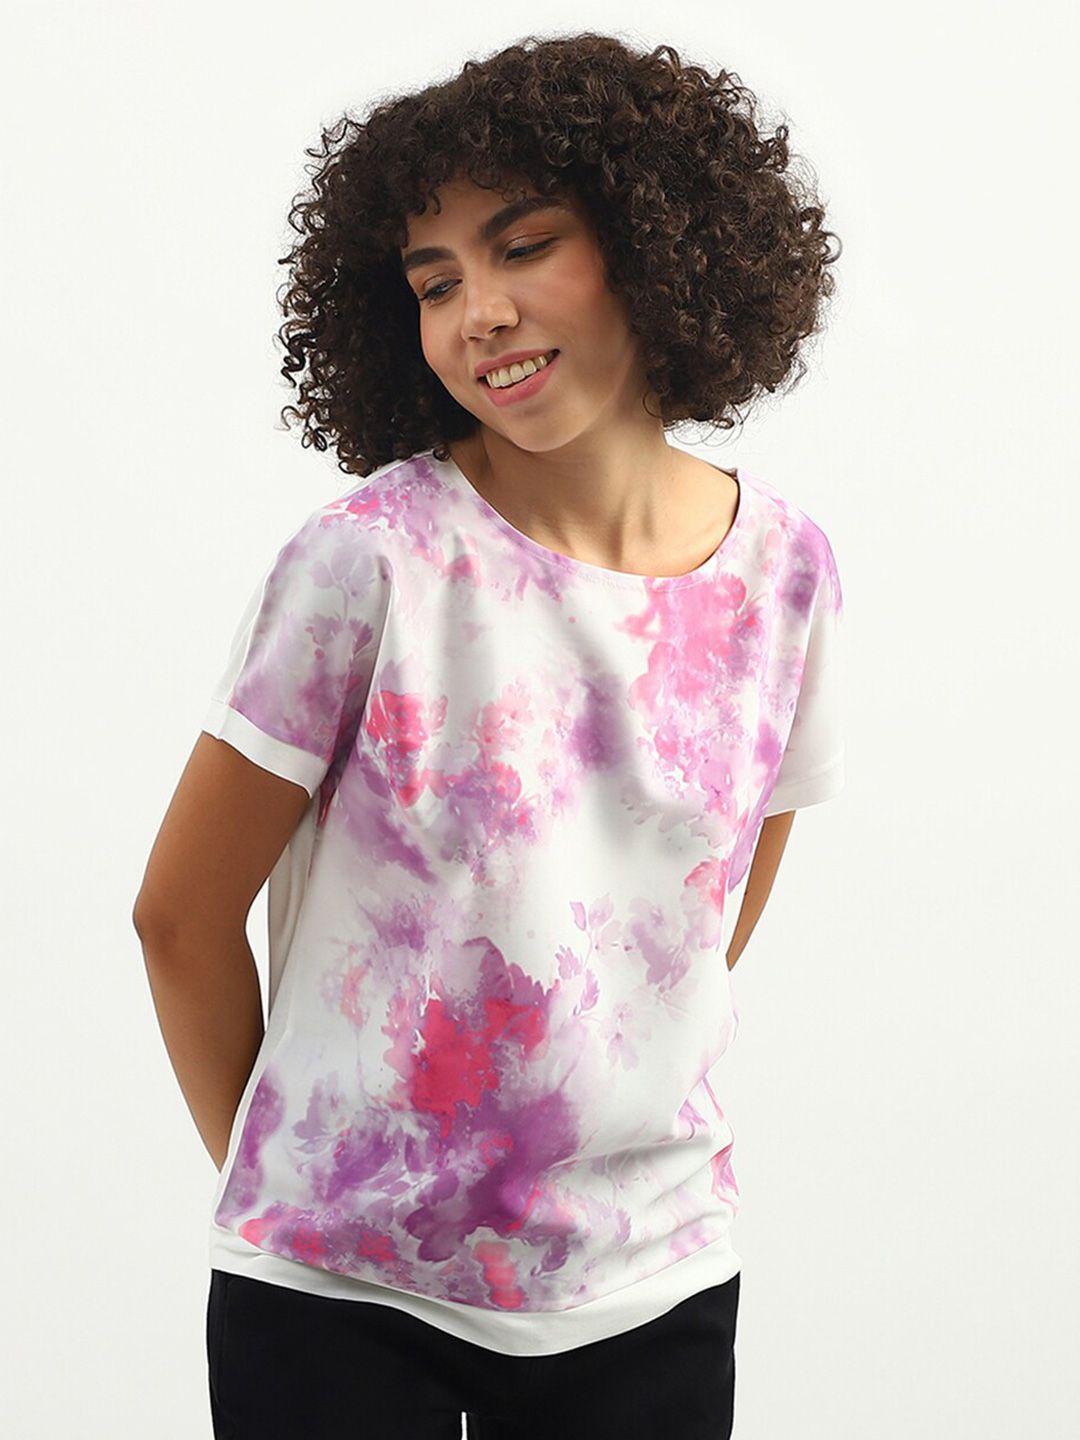 united colors of benetton tie and dye top